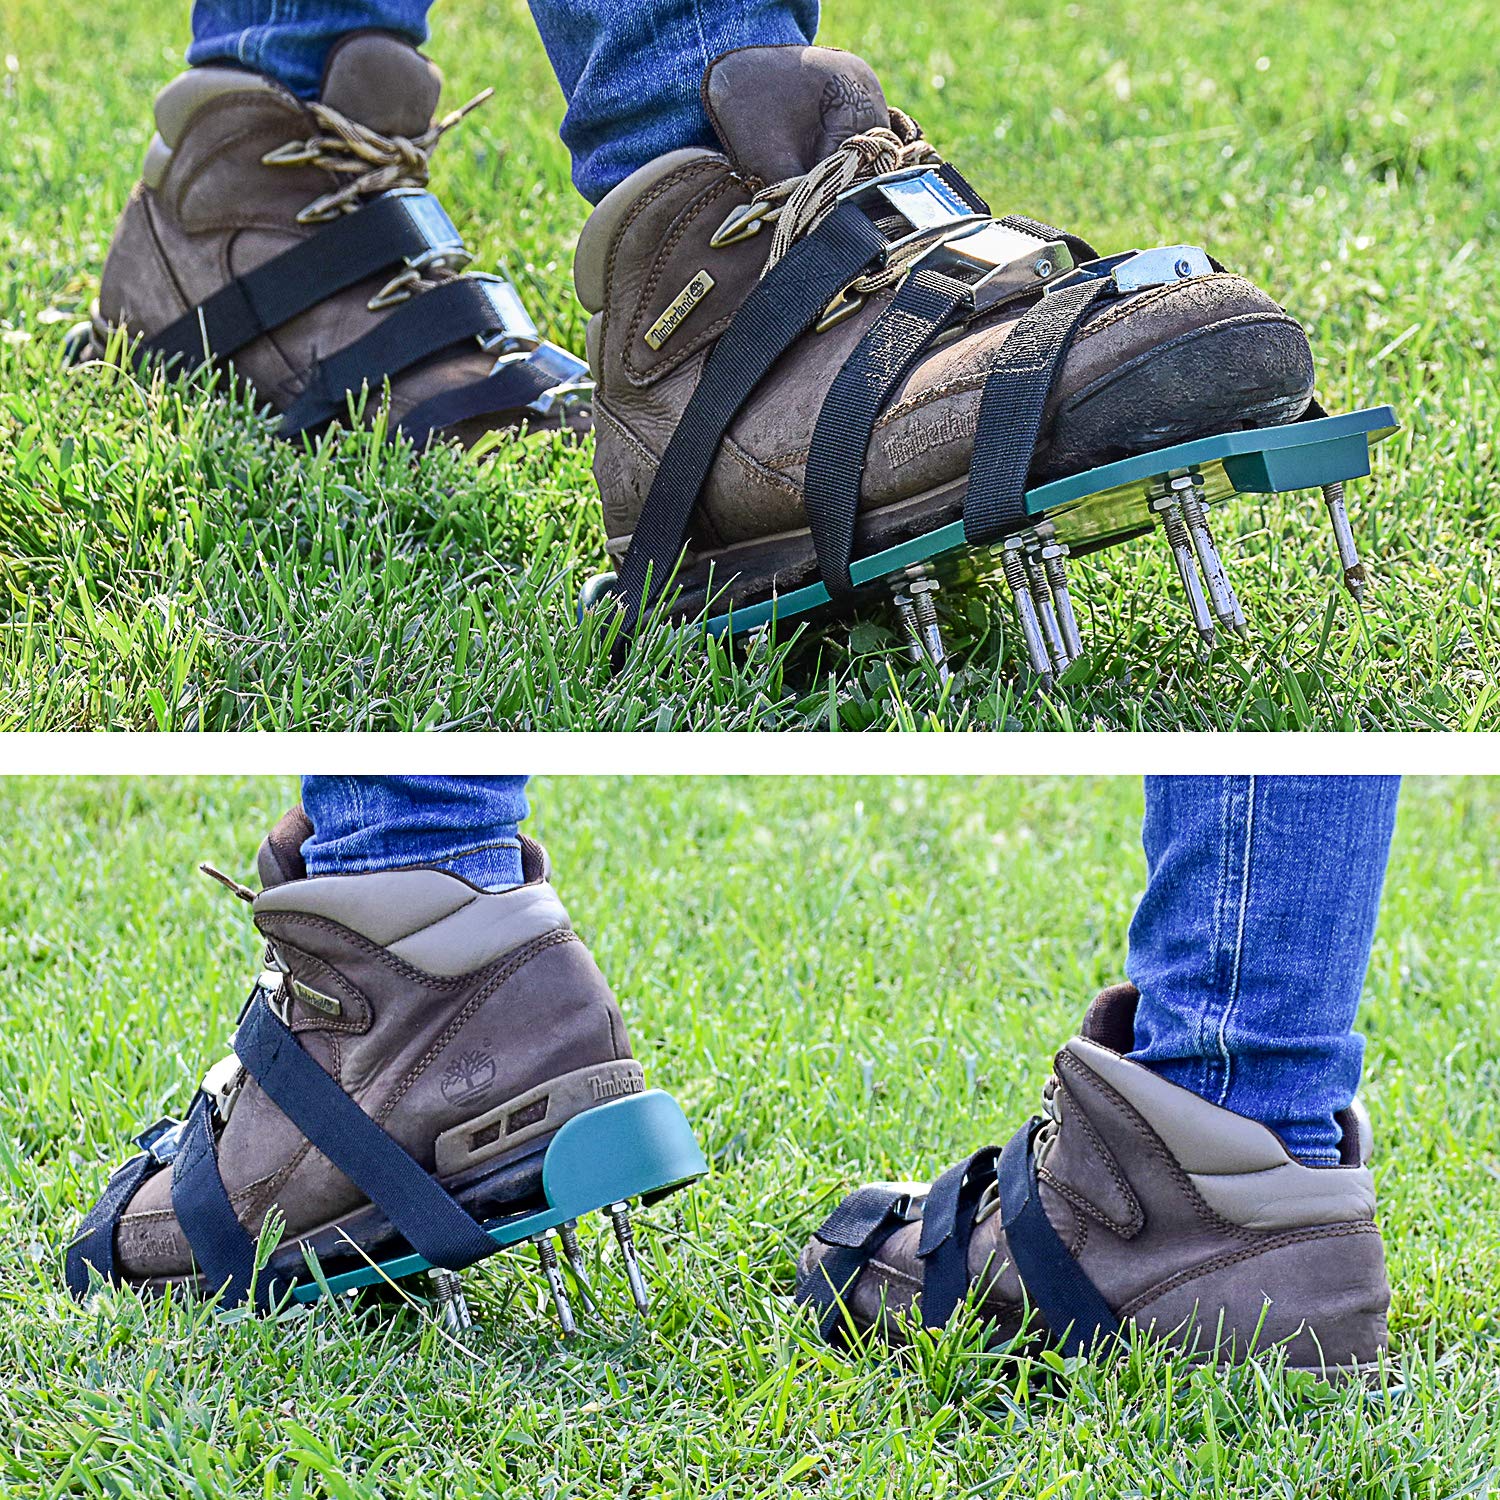 Abco Tech Lawn Aerator Spike Shoes for Aerating Lawn Soil | 3 Adjustable Straps and Heavy Duty Metal Buckles